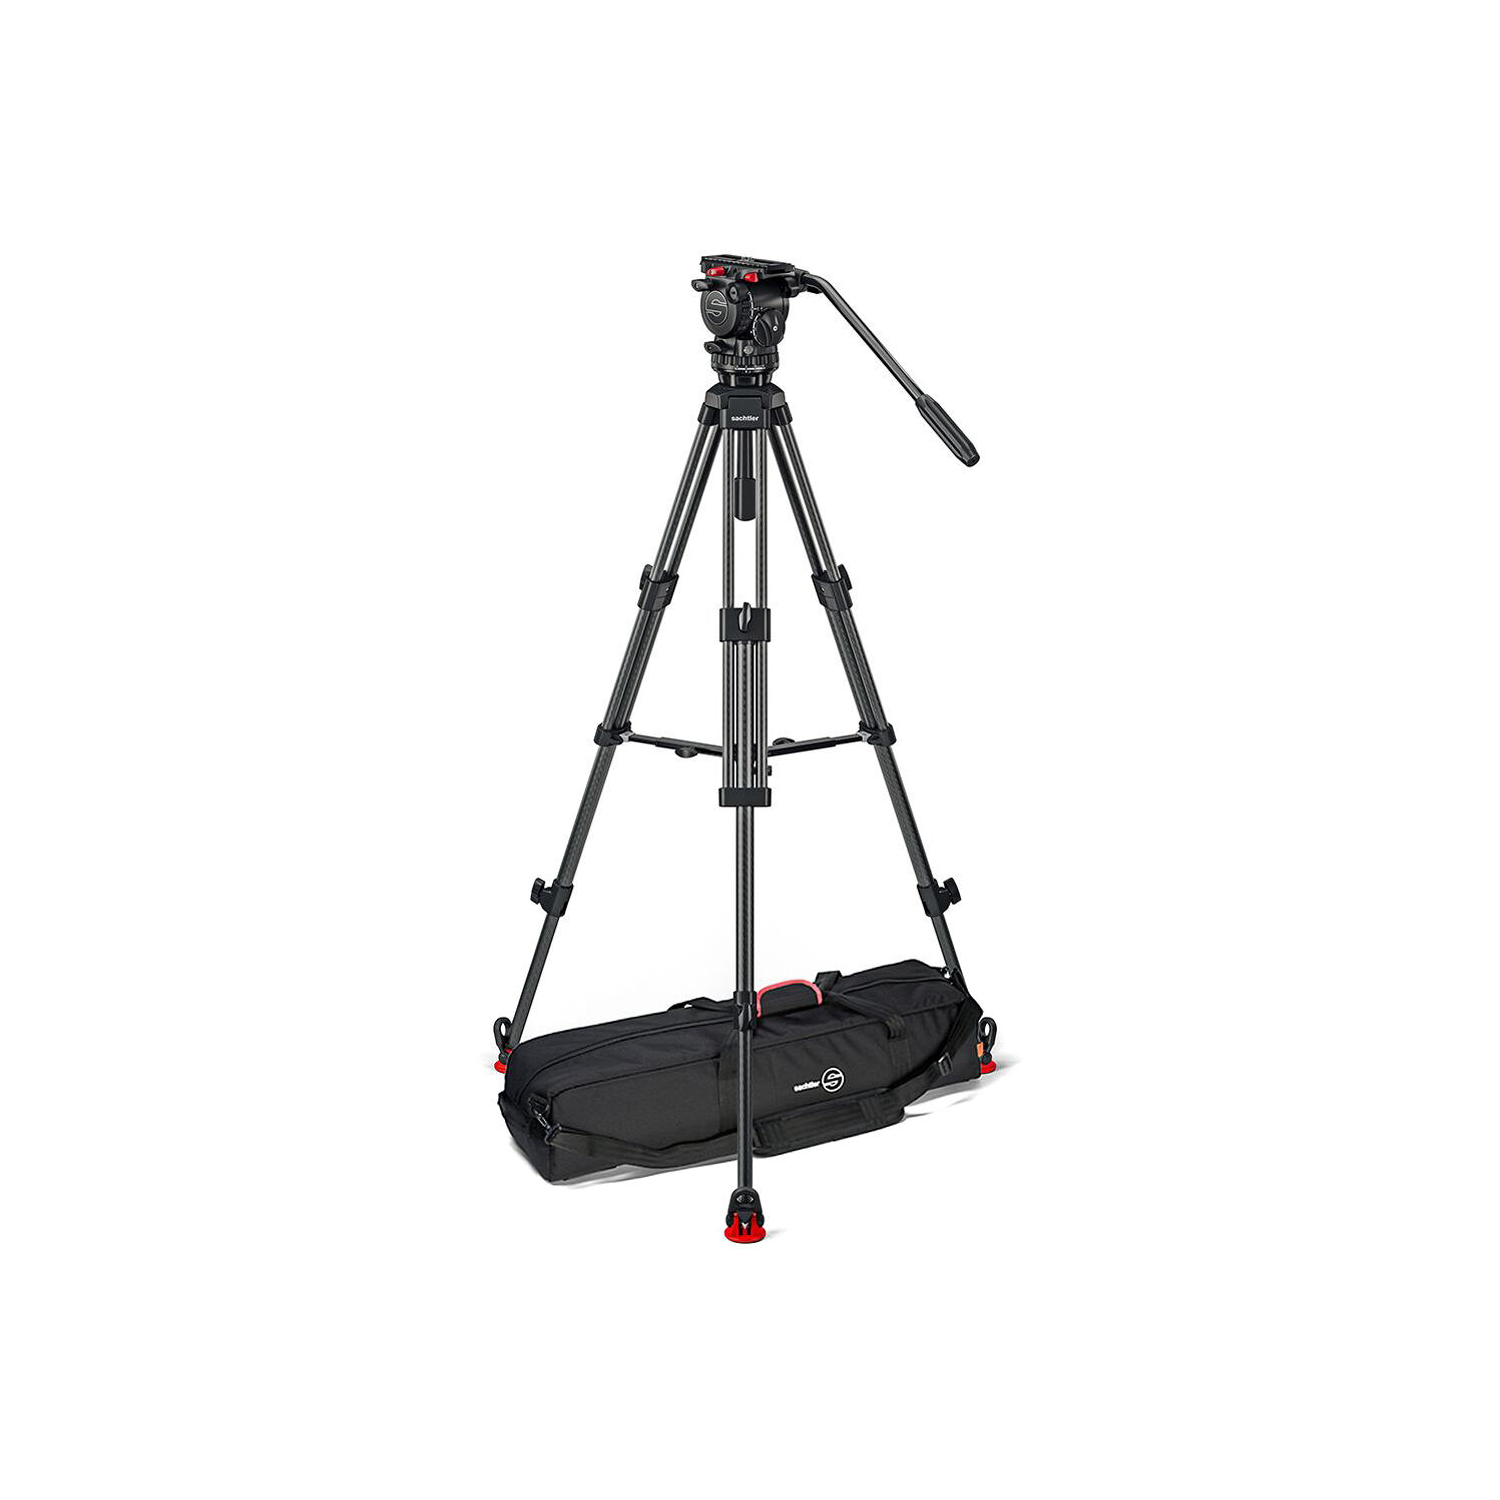 Sachtler System FSB 6 Mk II Sideload and 75/2 Carbon Fiber Tripod Legs with Mid-Level Spreader and Bag